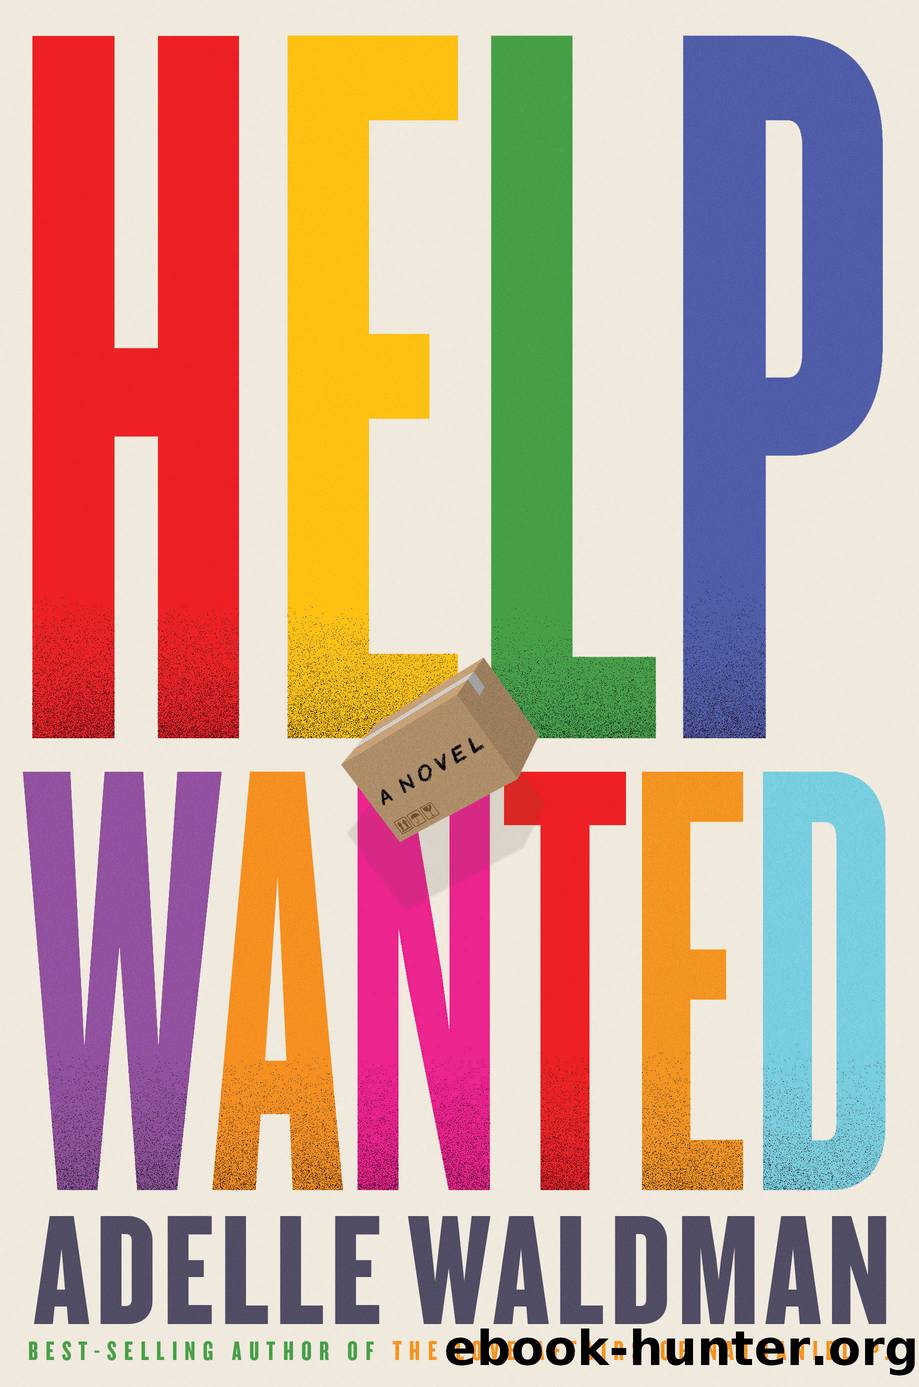 Help Wanted by Adelle Waldman